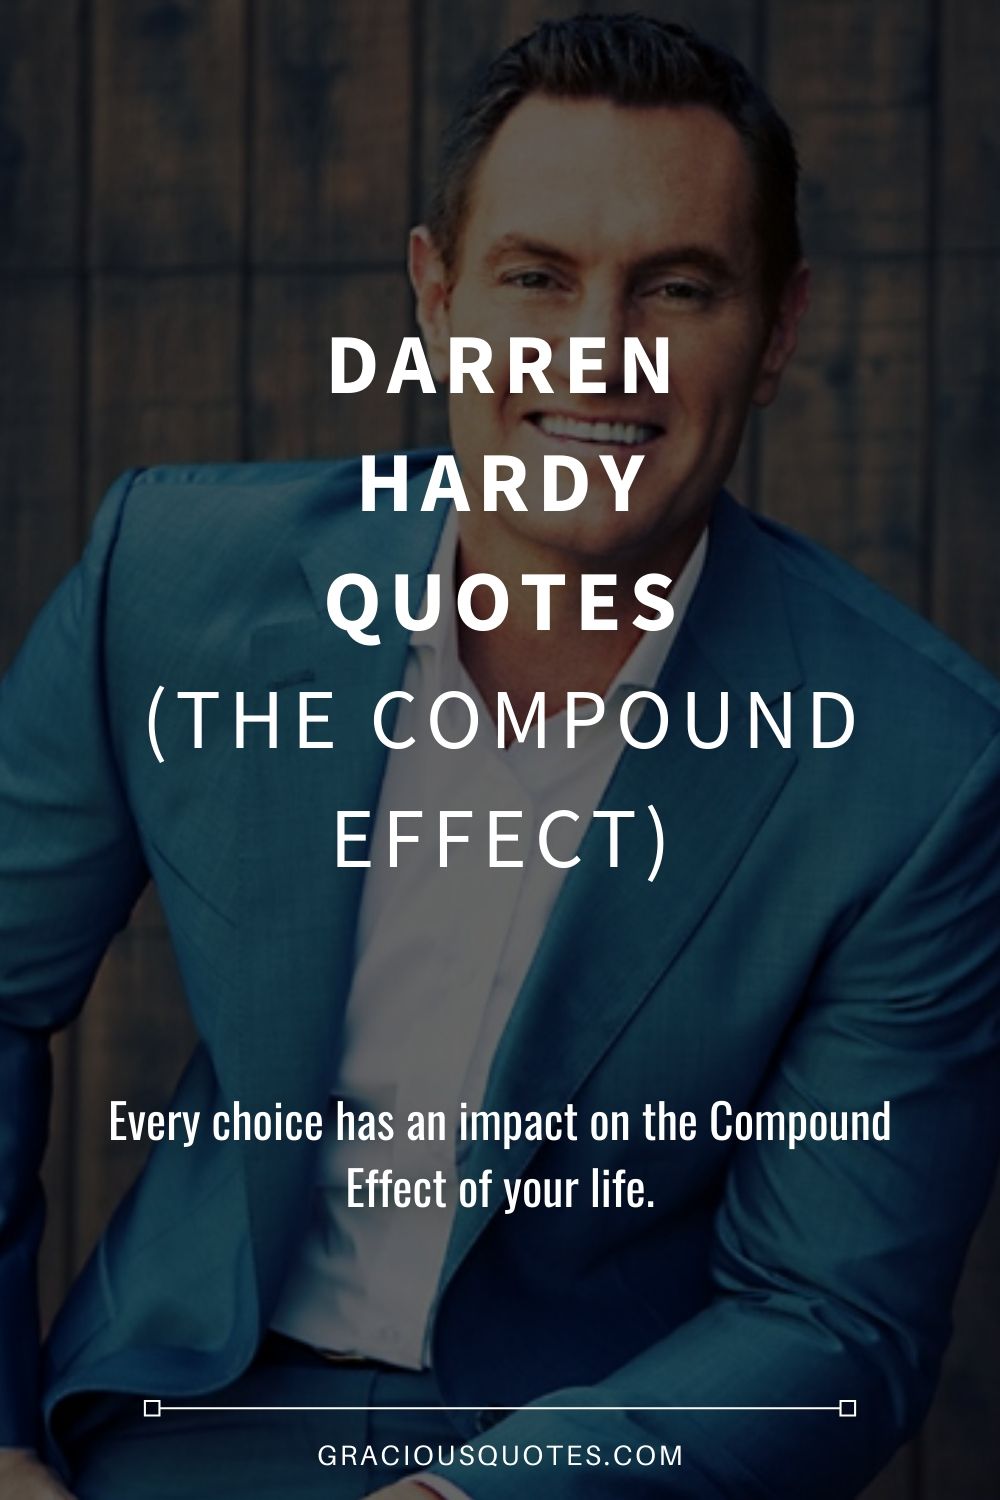 Darren Hardy Quotes (THE COMPOUND EFFECT) - Gracious Quotes